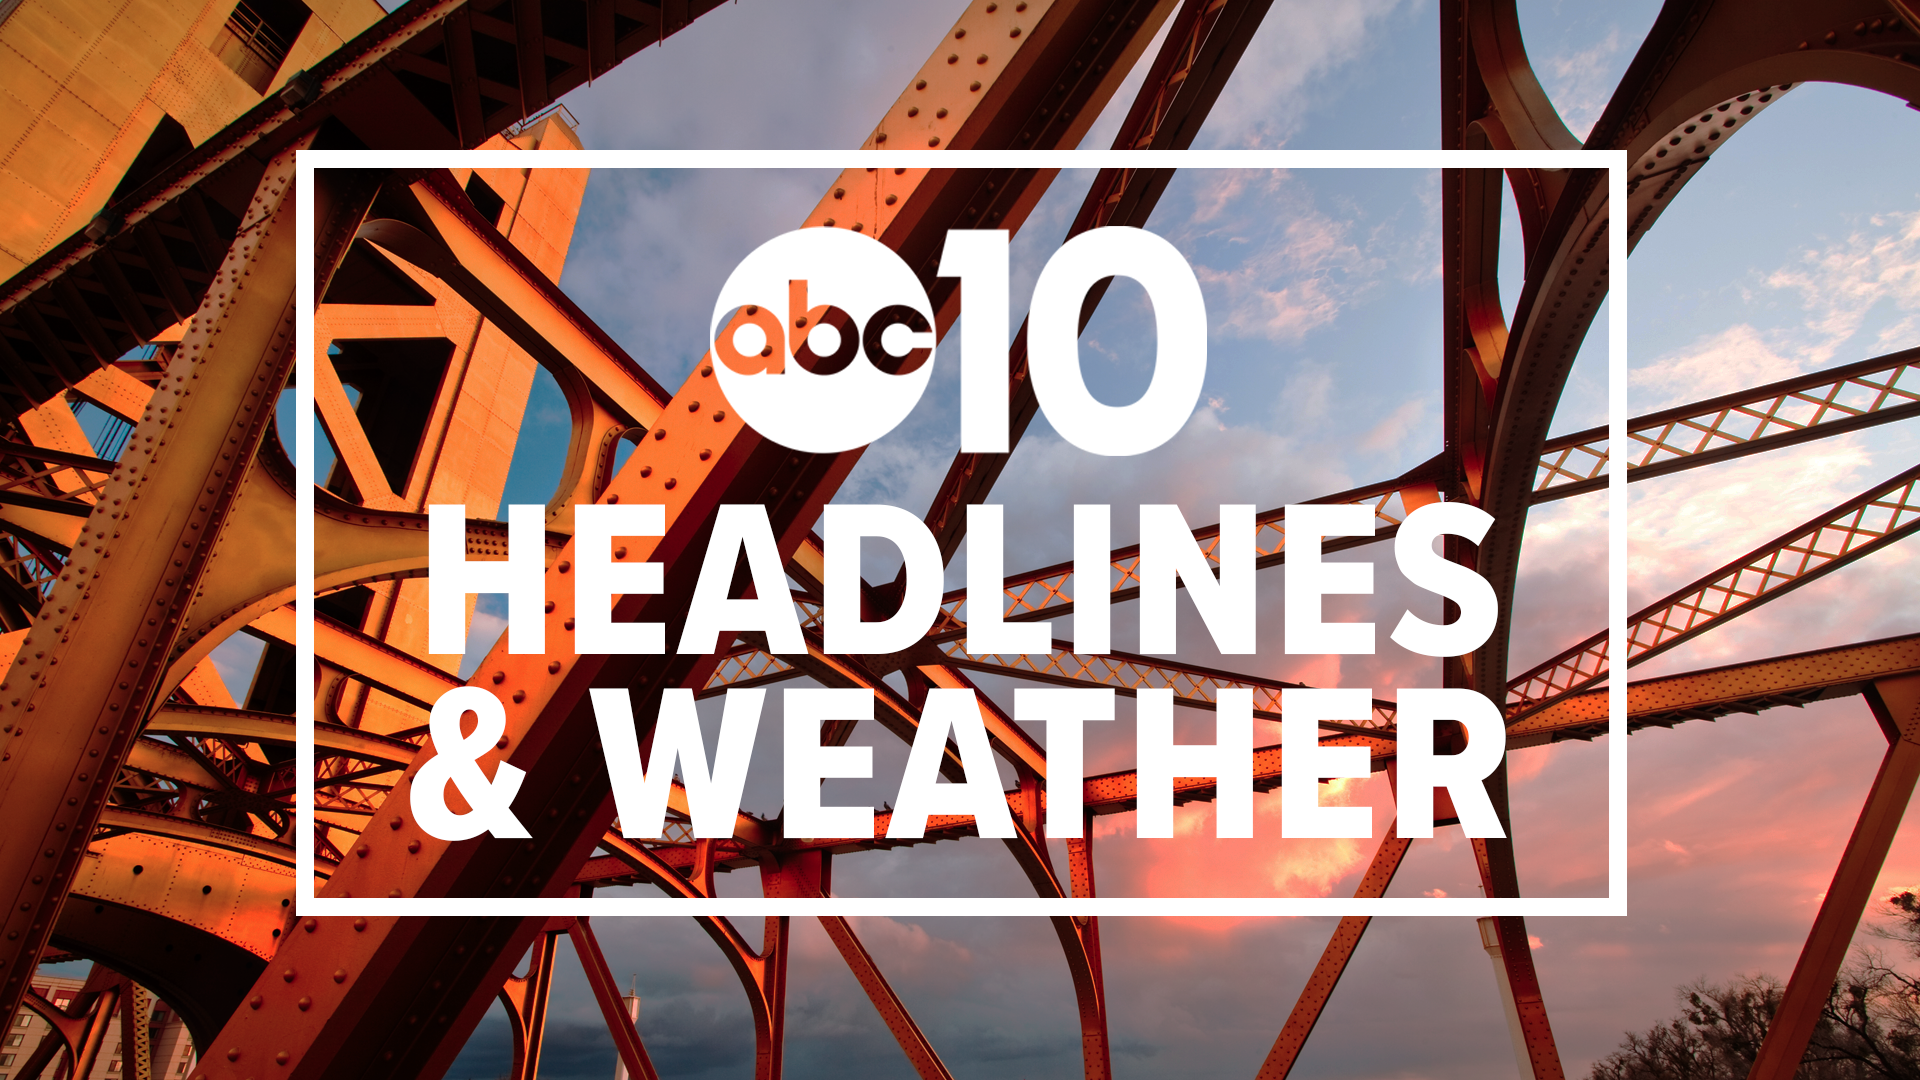 Evening Headlines: March 19, 2020 | Catch in-depth reporting on #LateNewsTonight at 11 p.m. | The latest Sacramento news is always at www.abc10.com.